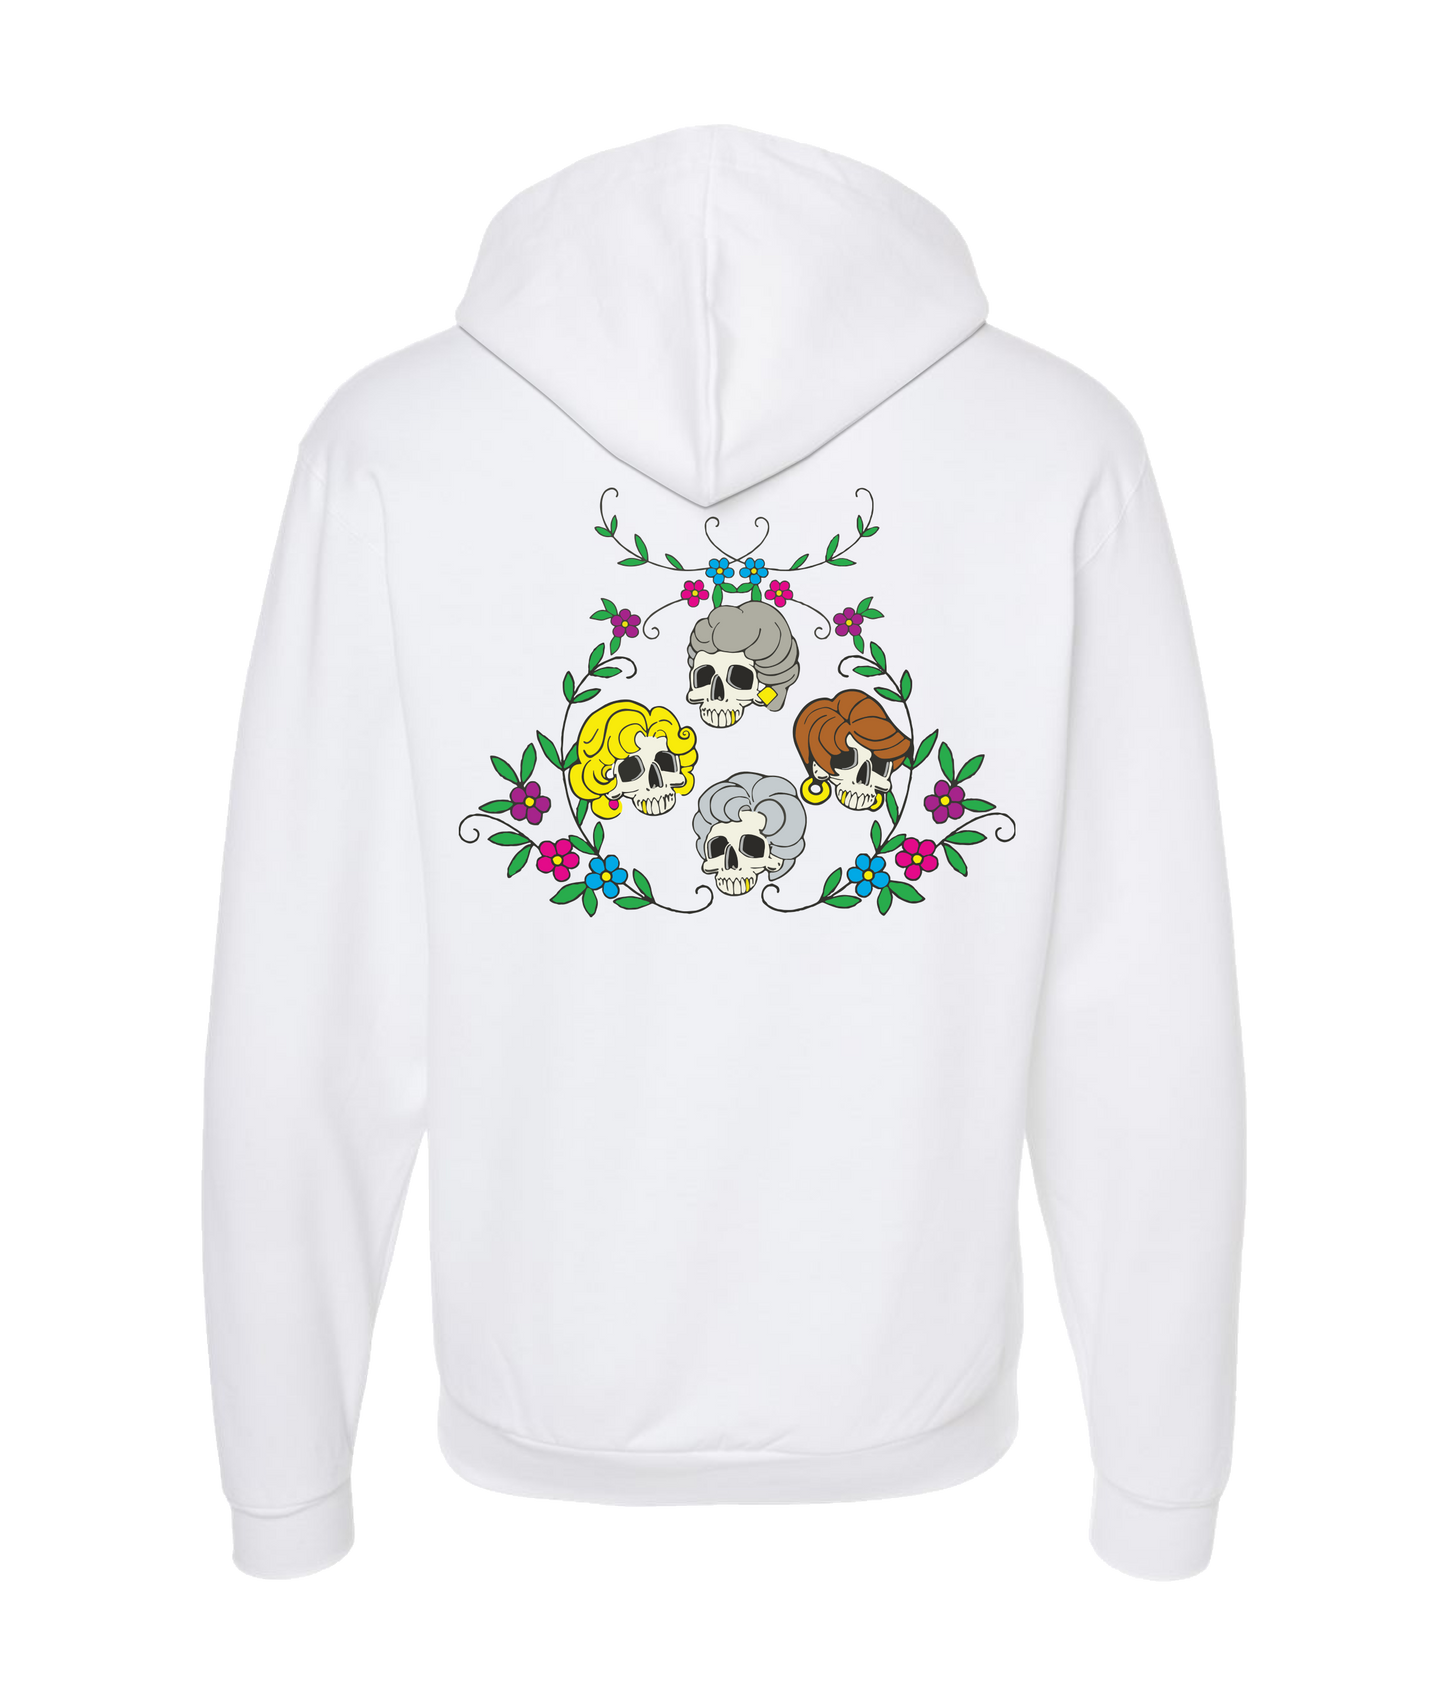 Common Criminal - Soup Girls - White Zip Up Hoodie